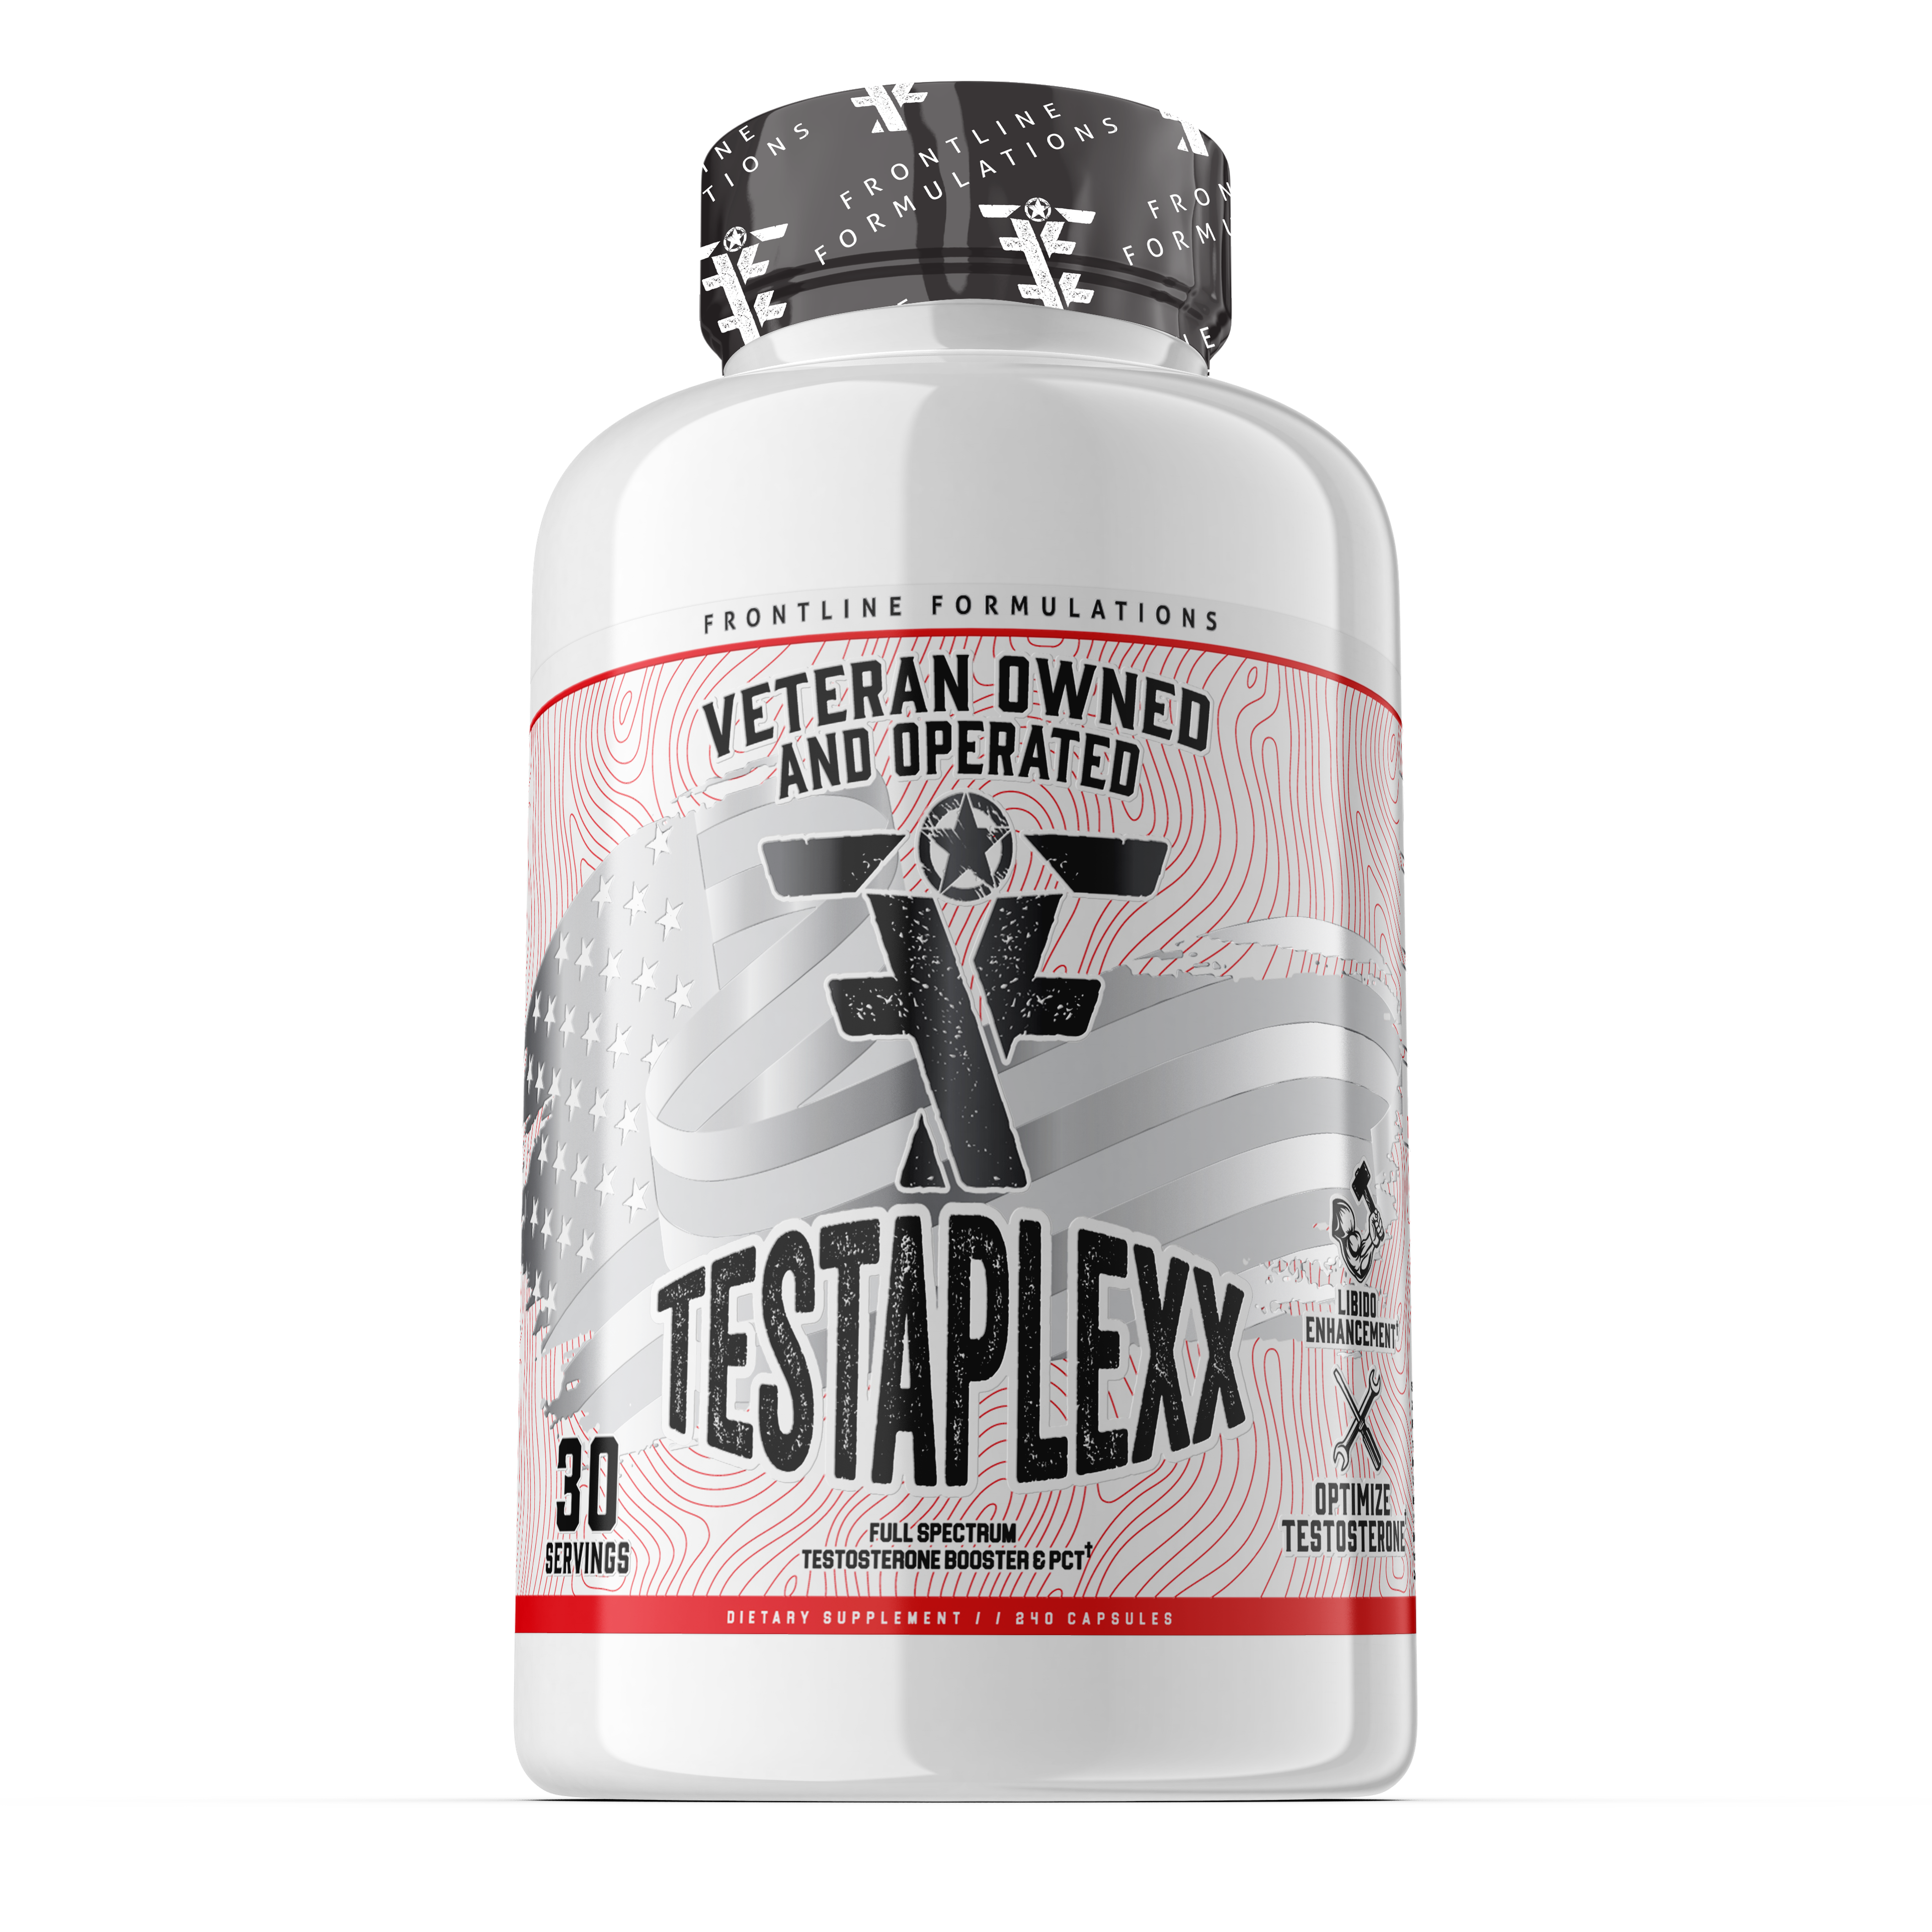 Testaplexx - NEW & Improved Formula Testaplexx: Unlock the potential of Testaplexx—a comprehensive blend of ingredients designed to support men's health on every front. With a focus on enhancing testosterone levels, Testaplexx provides nourishment for lib